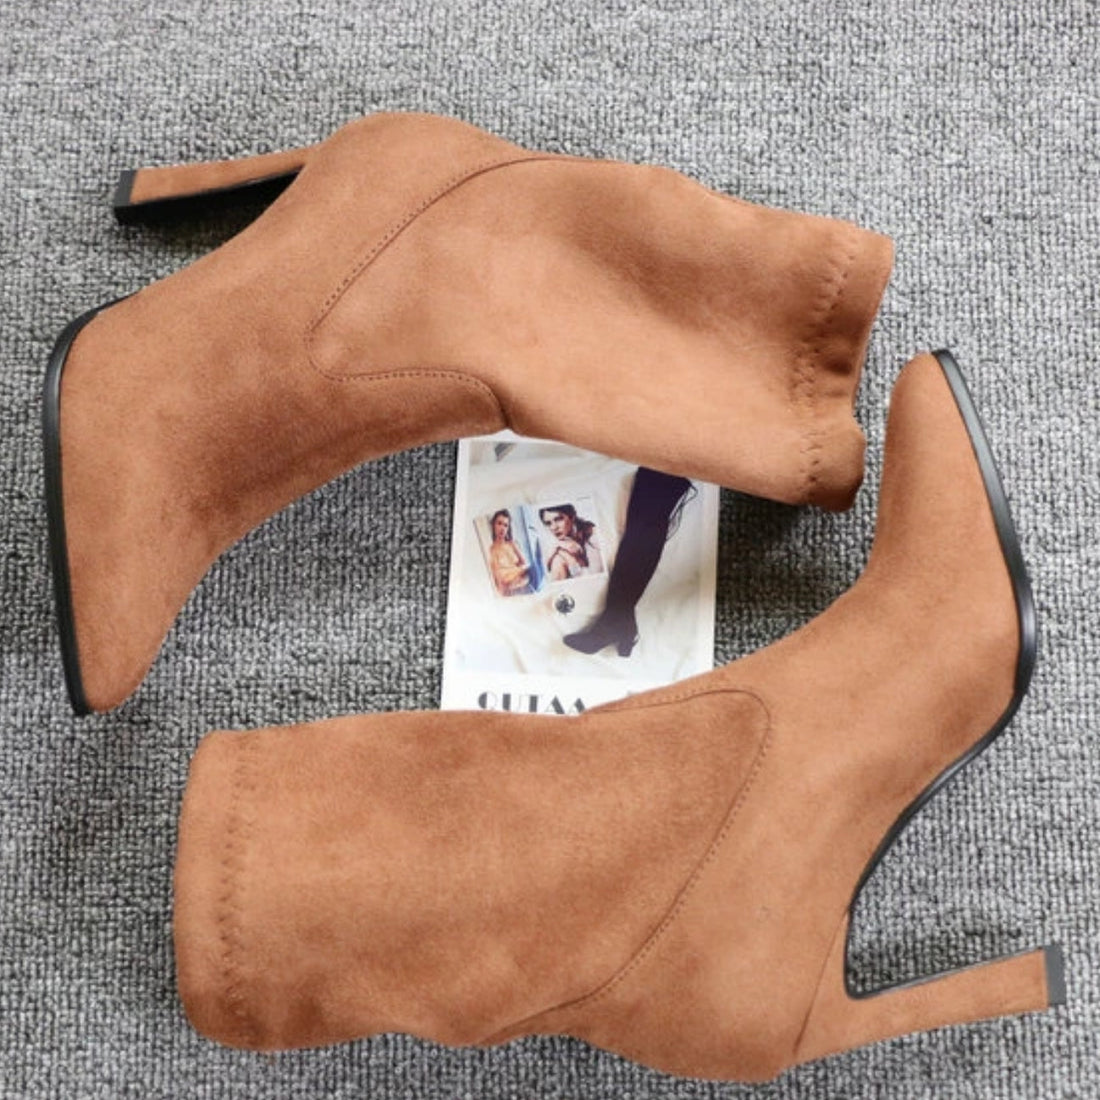 Women's Spring/Autumn Suede Ankle Boots With High Heels